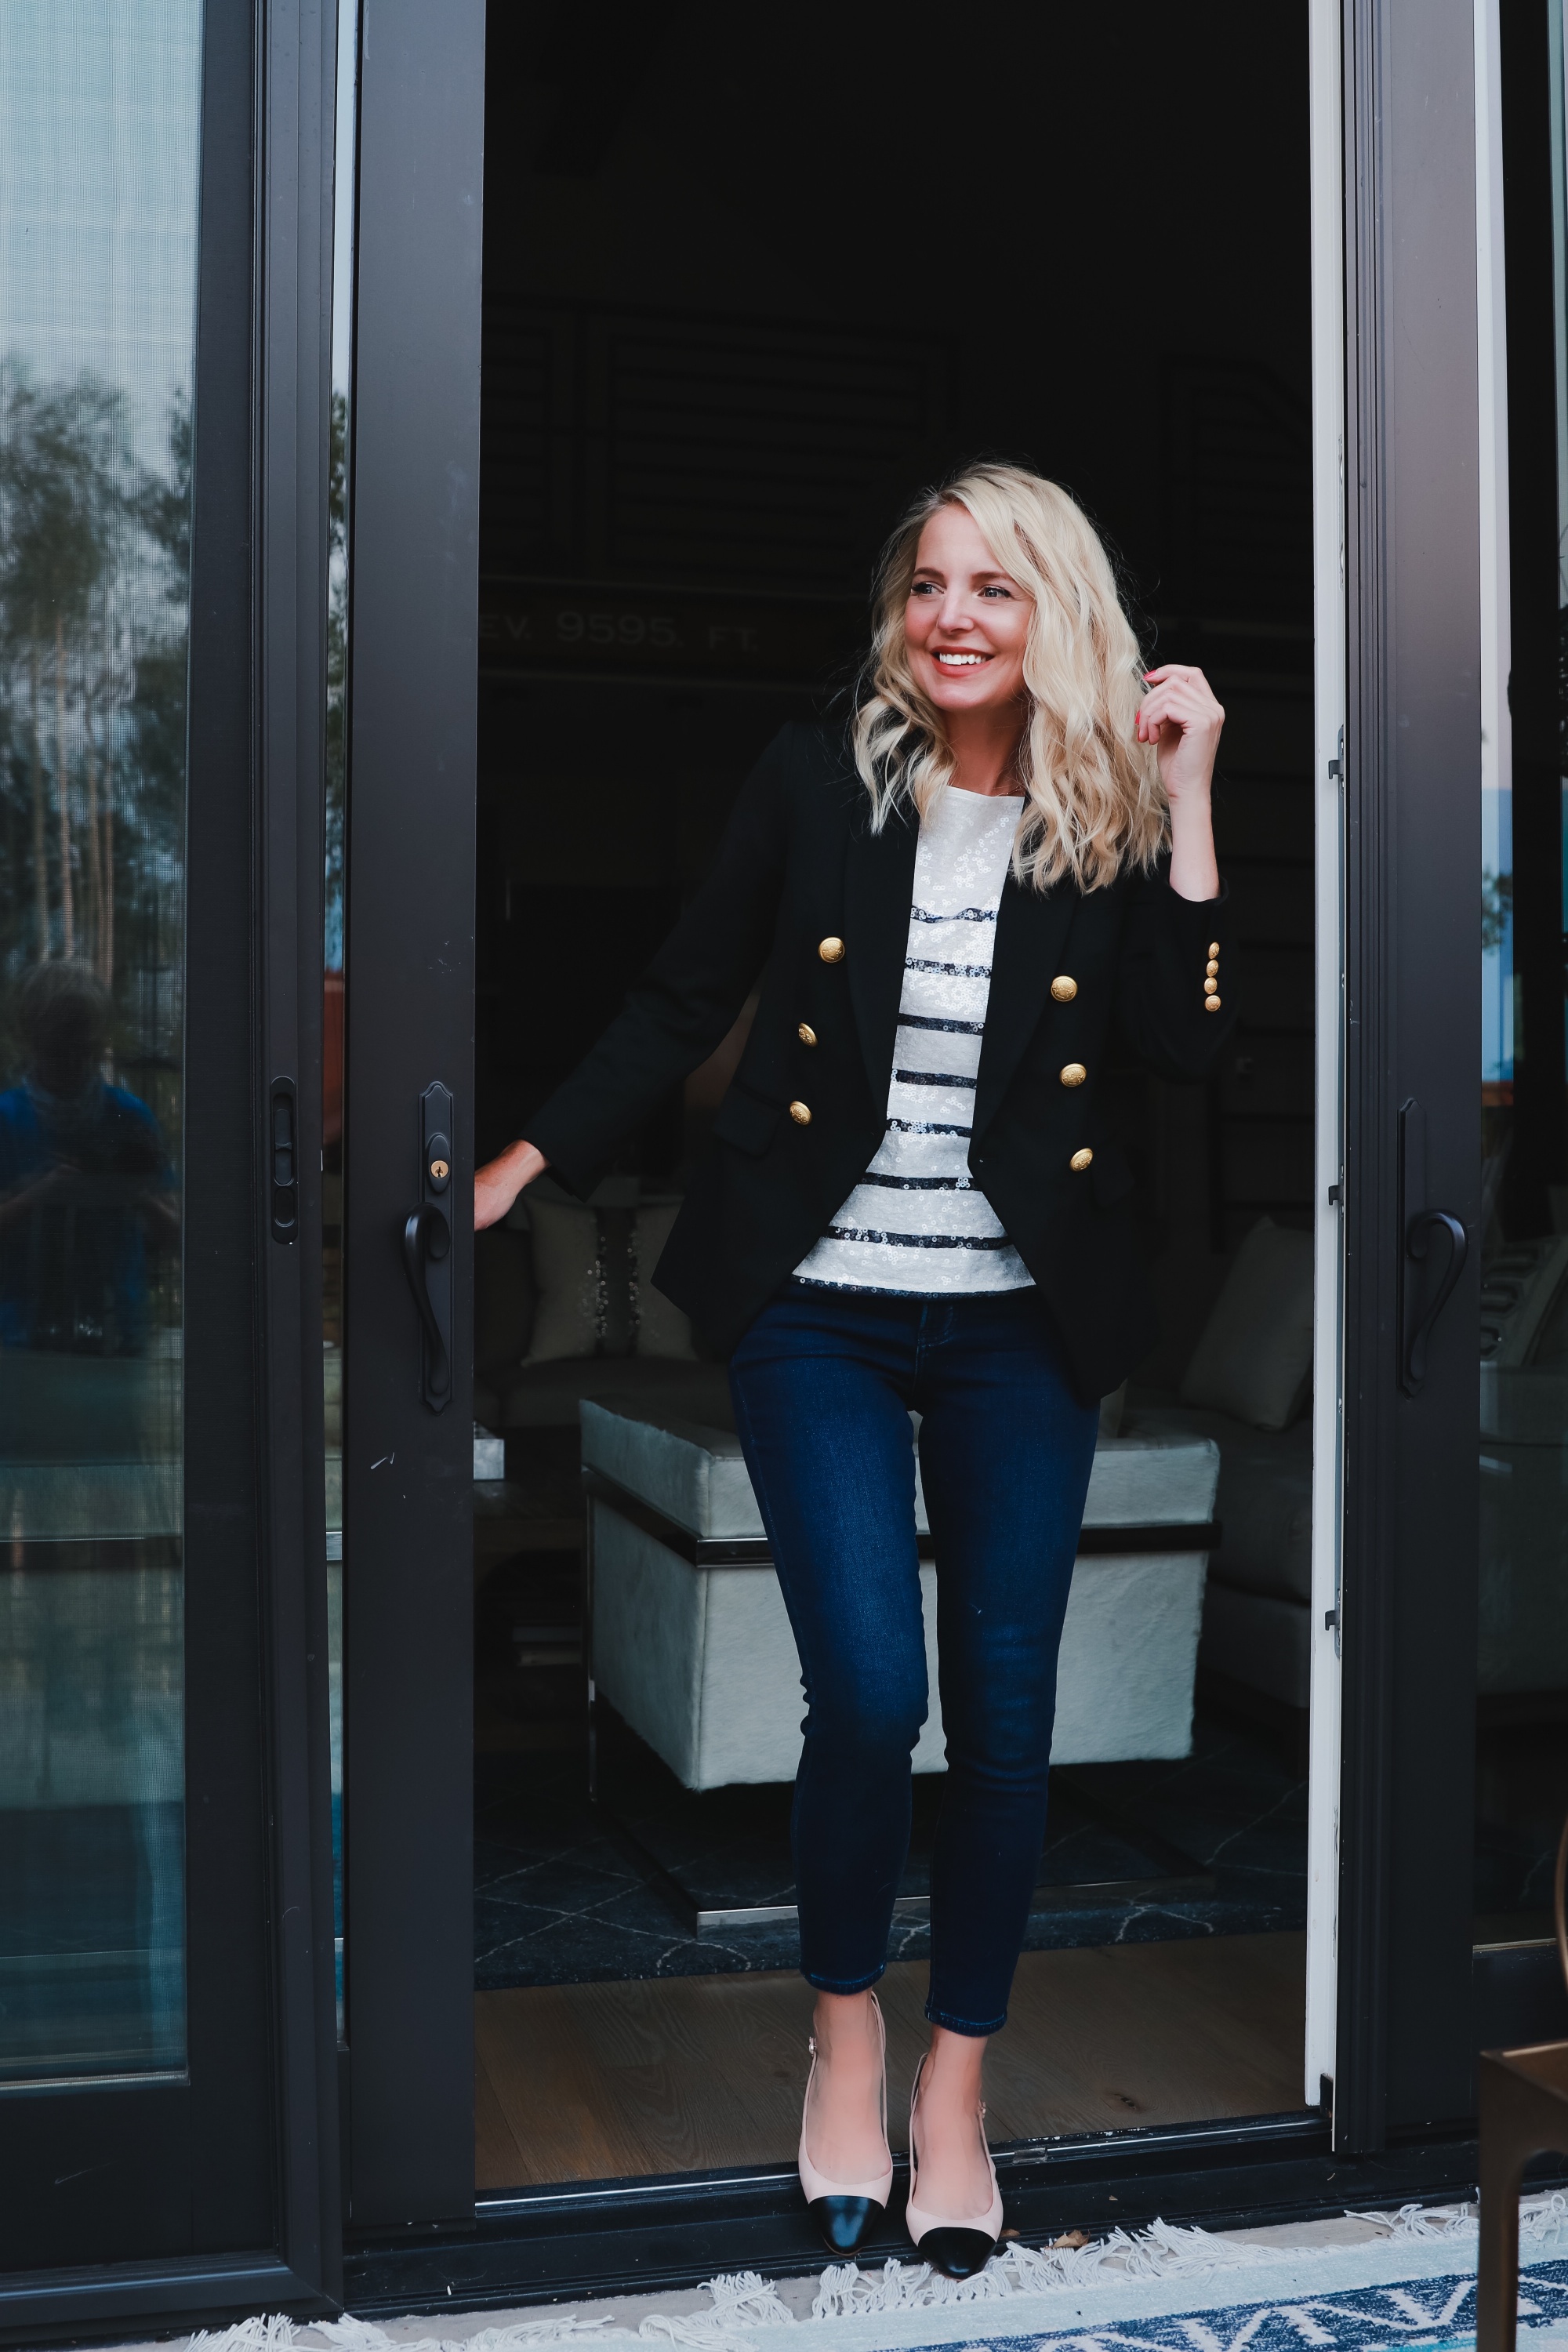 Express Denim, Fashion blogger Erin Busbee of Busbee Style wearing Luxe Comfort knit dark wash skinny jeans, striped sequin shirt, black blazer from Express with nude and black cap toe slingbacks by Sam Edelman sitting on her patio in Telluride, Colorado